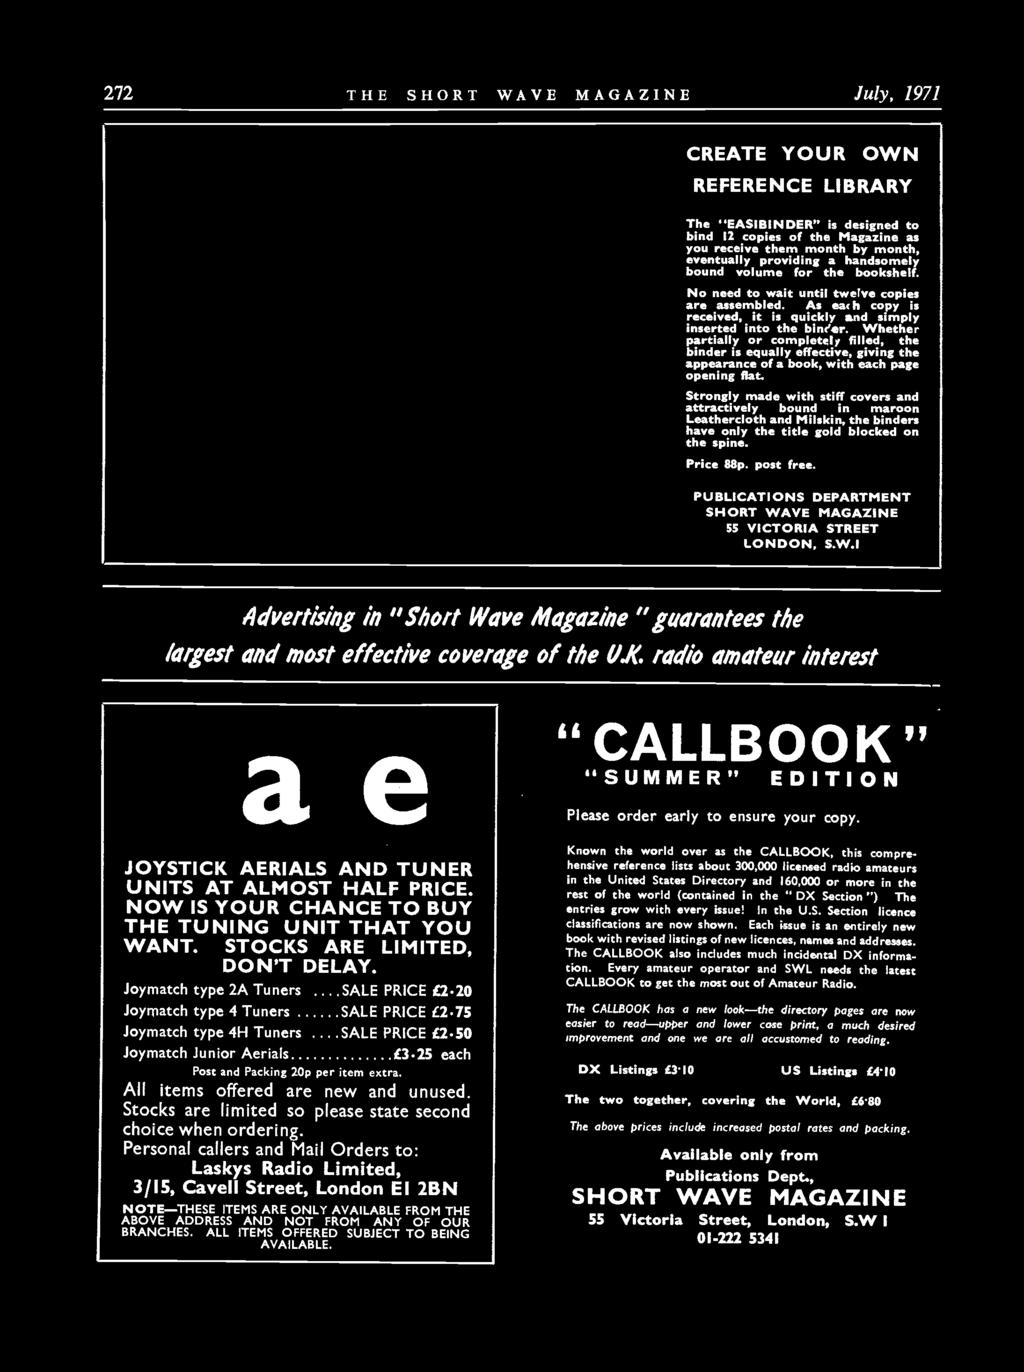 PUBLICATIONS DEPARTMENT SHORT WAVE MAGAZINE 55 VICTORIA STREET LONDON, S.W.1 Advertising in "Short Wave Magazine "guarantees the largest and most effective coverage of the U.K.